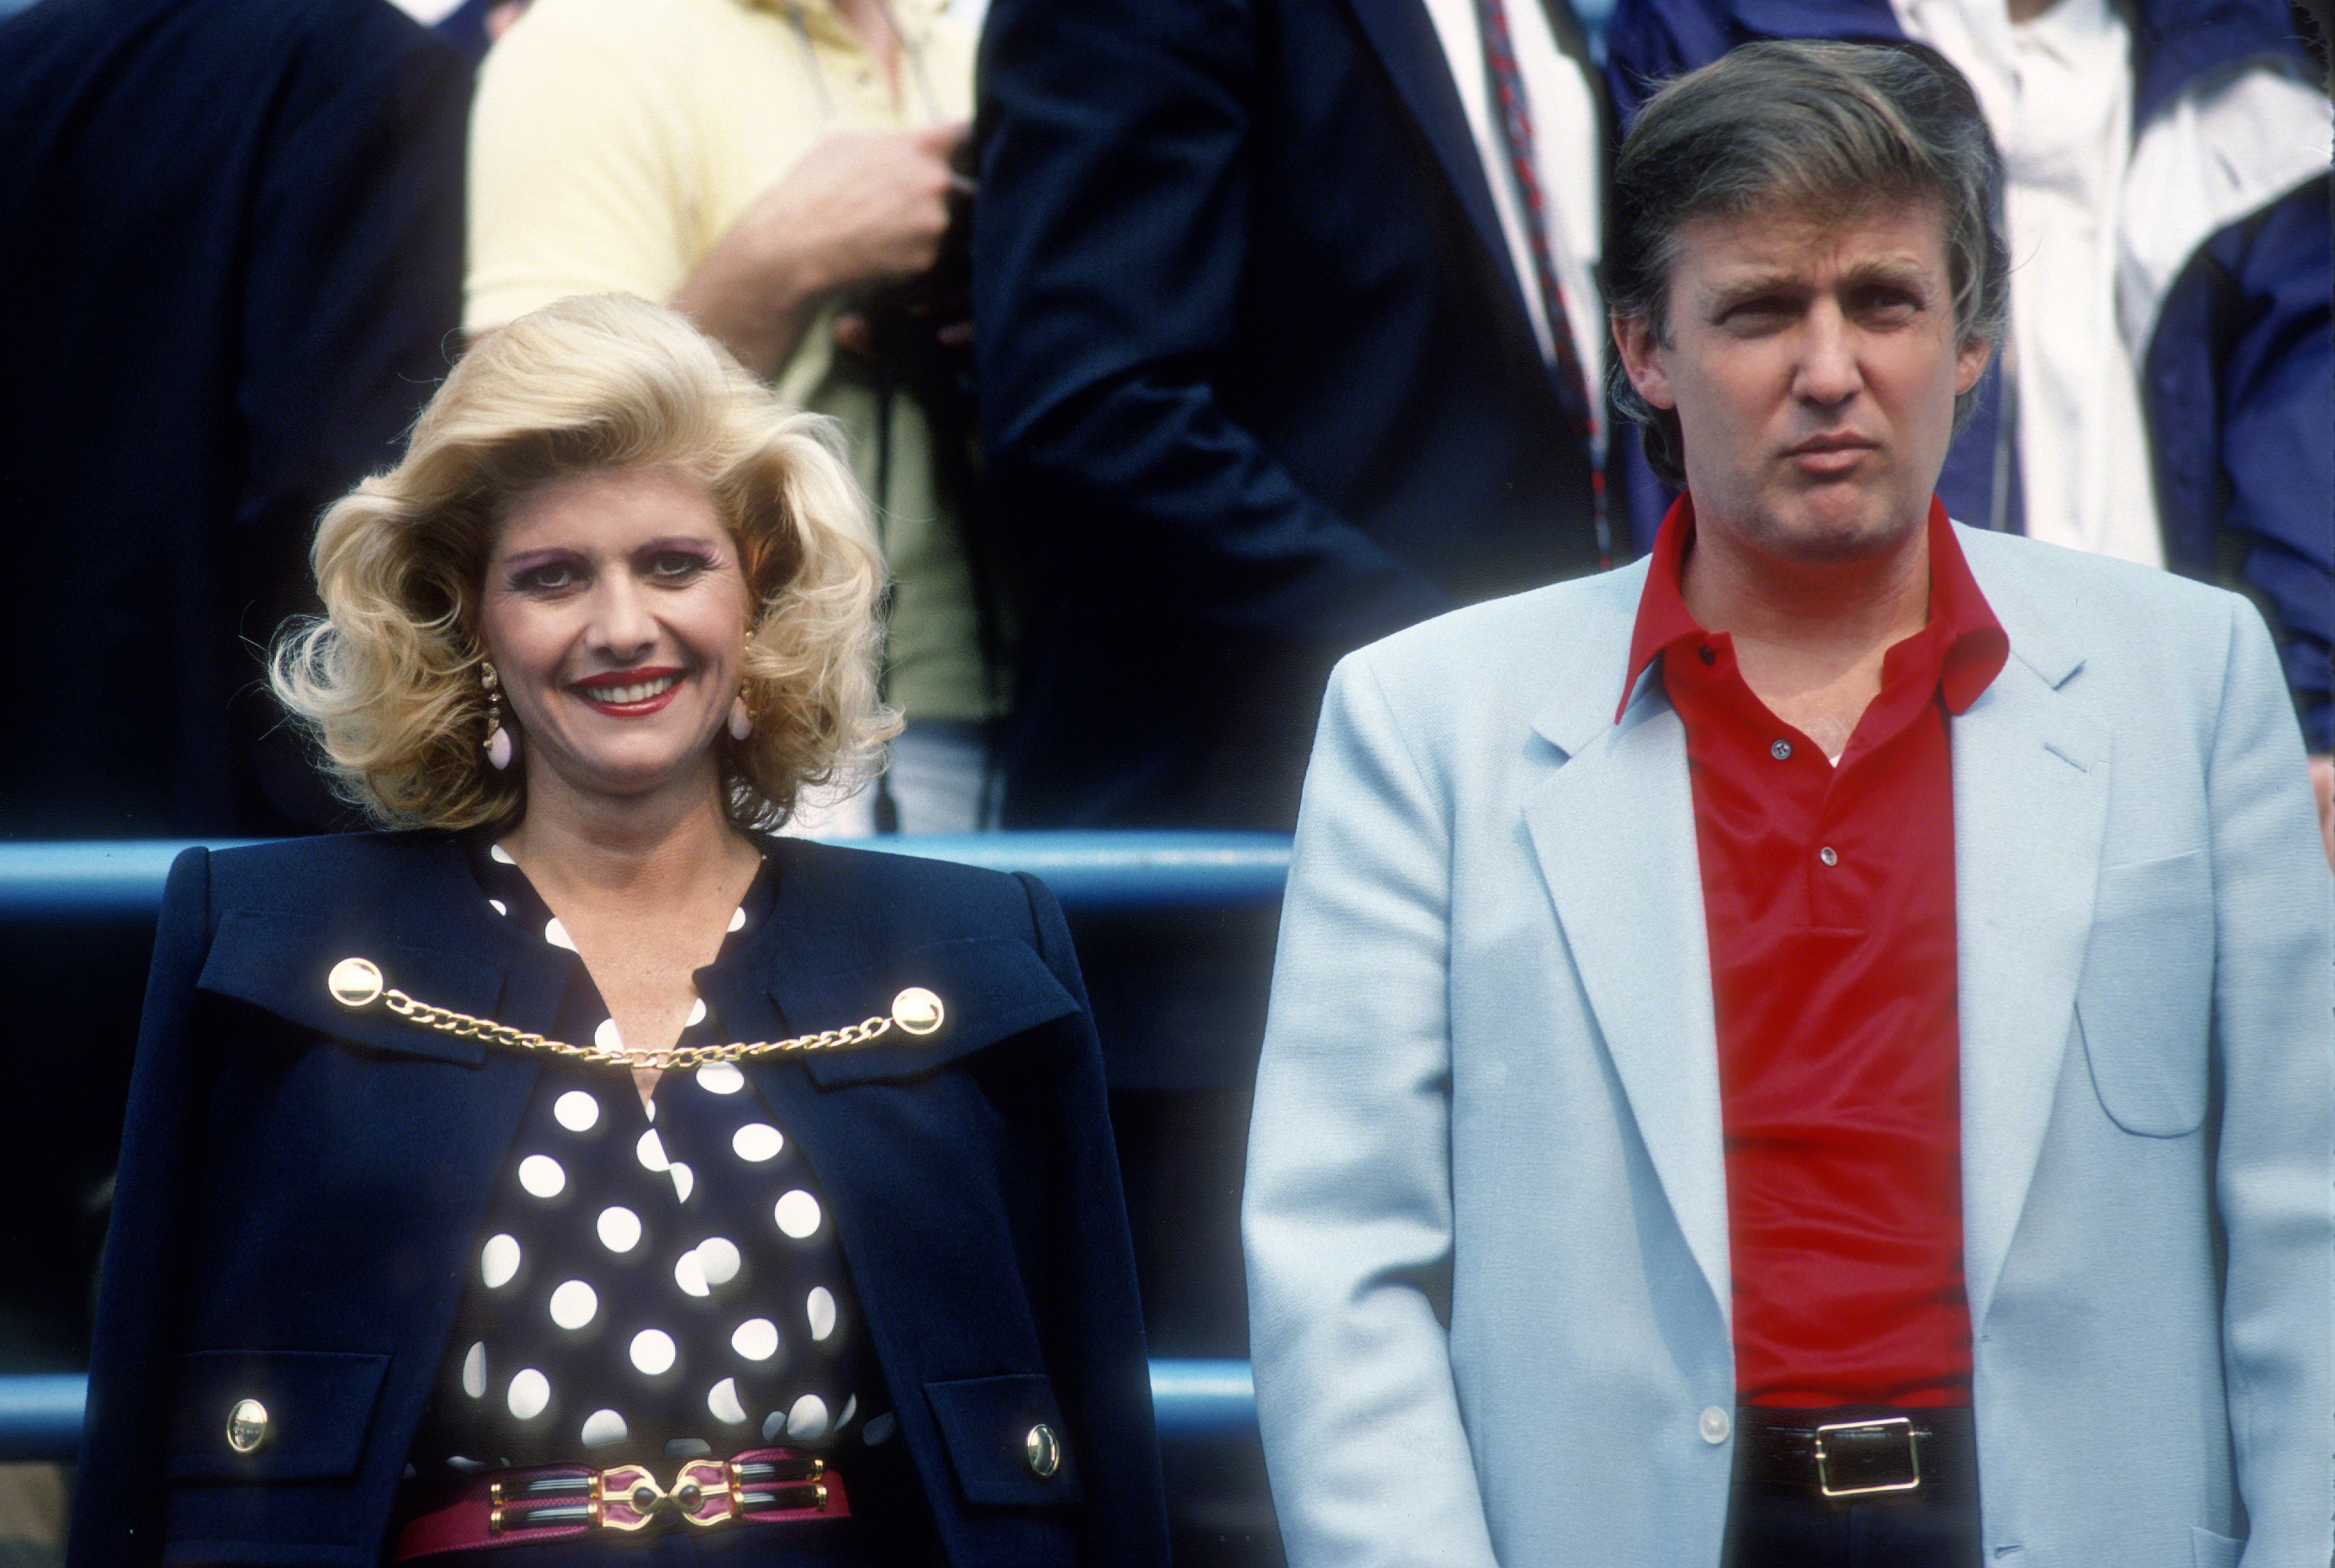 Ivana Trump and Donald Trump attend the U.S. Open Tennis Tournament circa 1988. (Images Press—Getty Images)